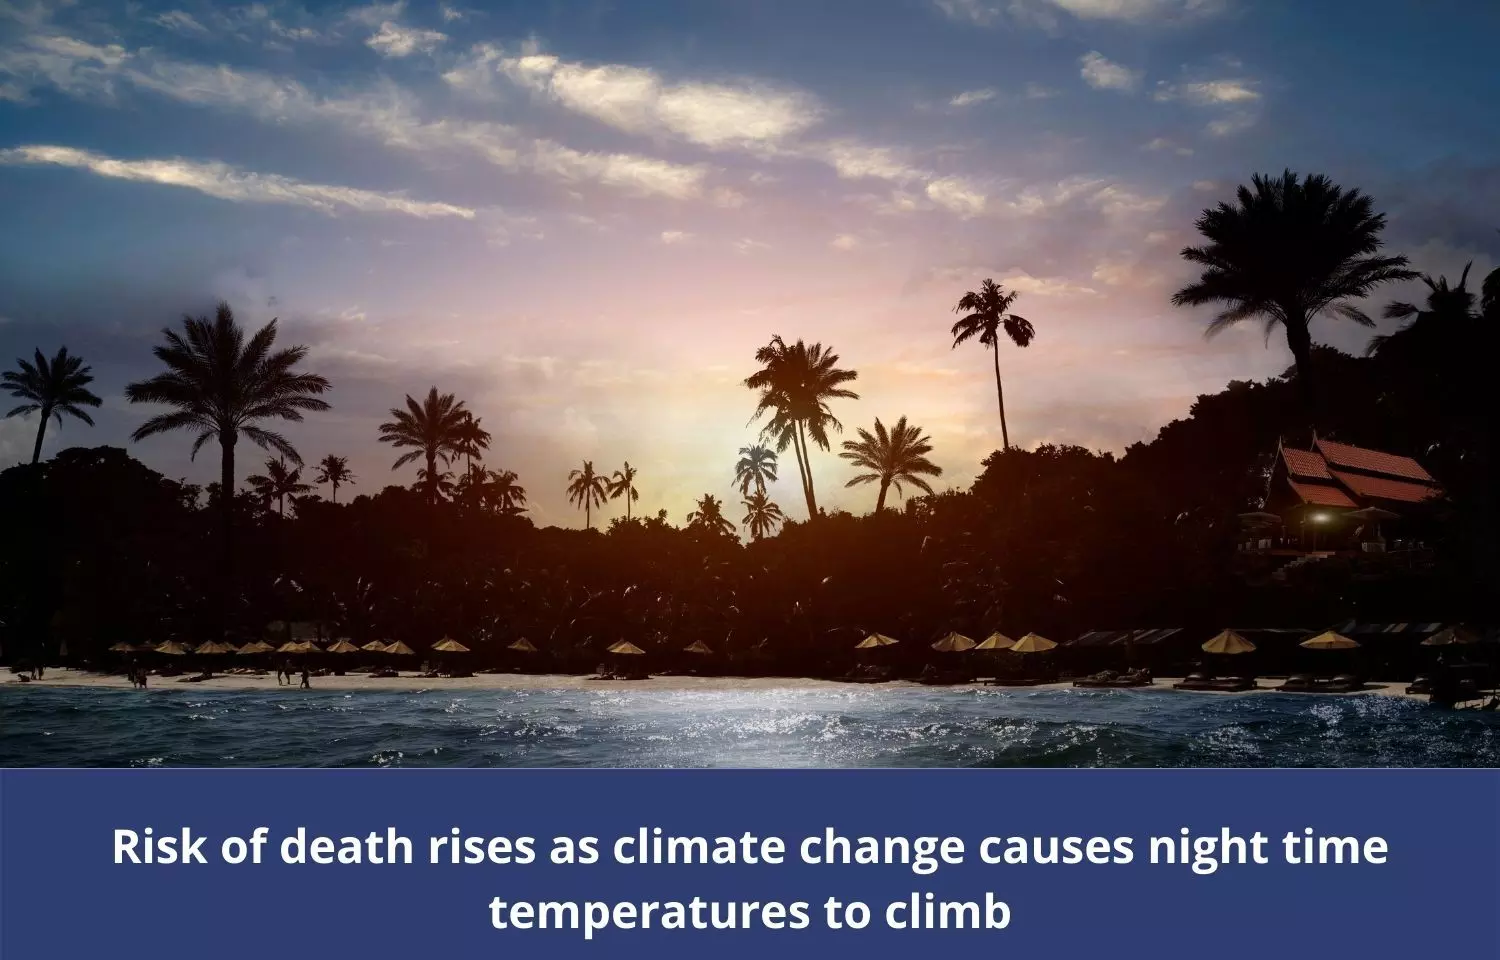 Risk of death rises as climate change causes night time temperatures to climb